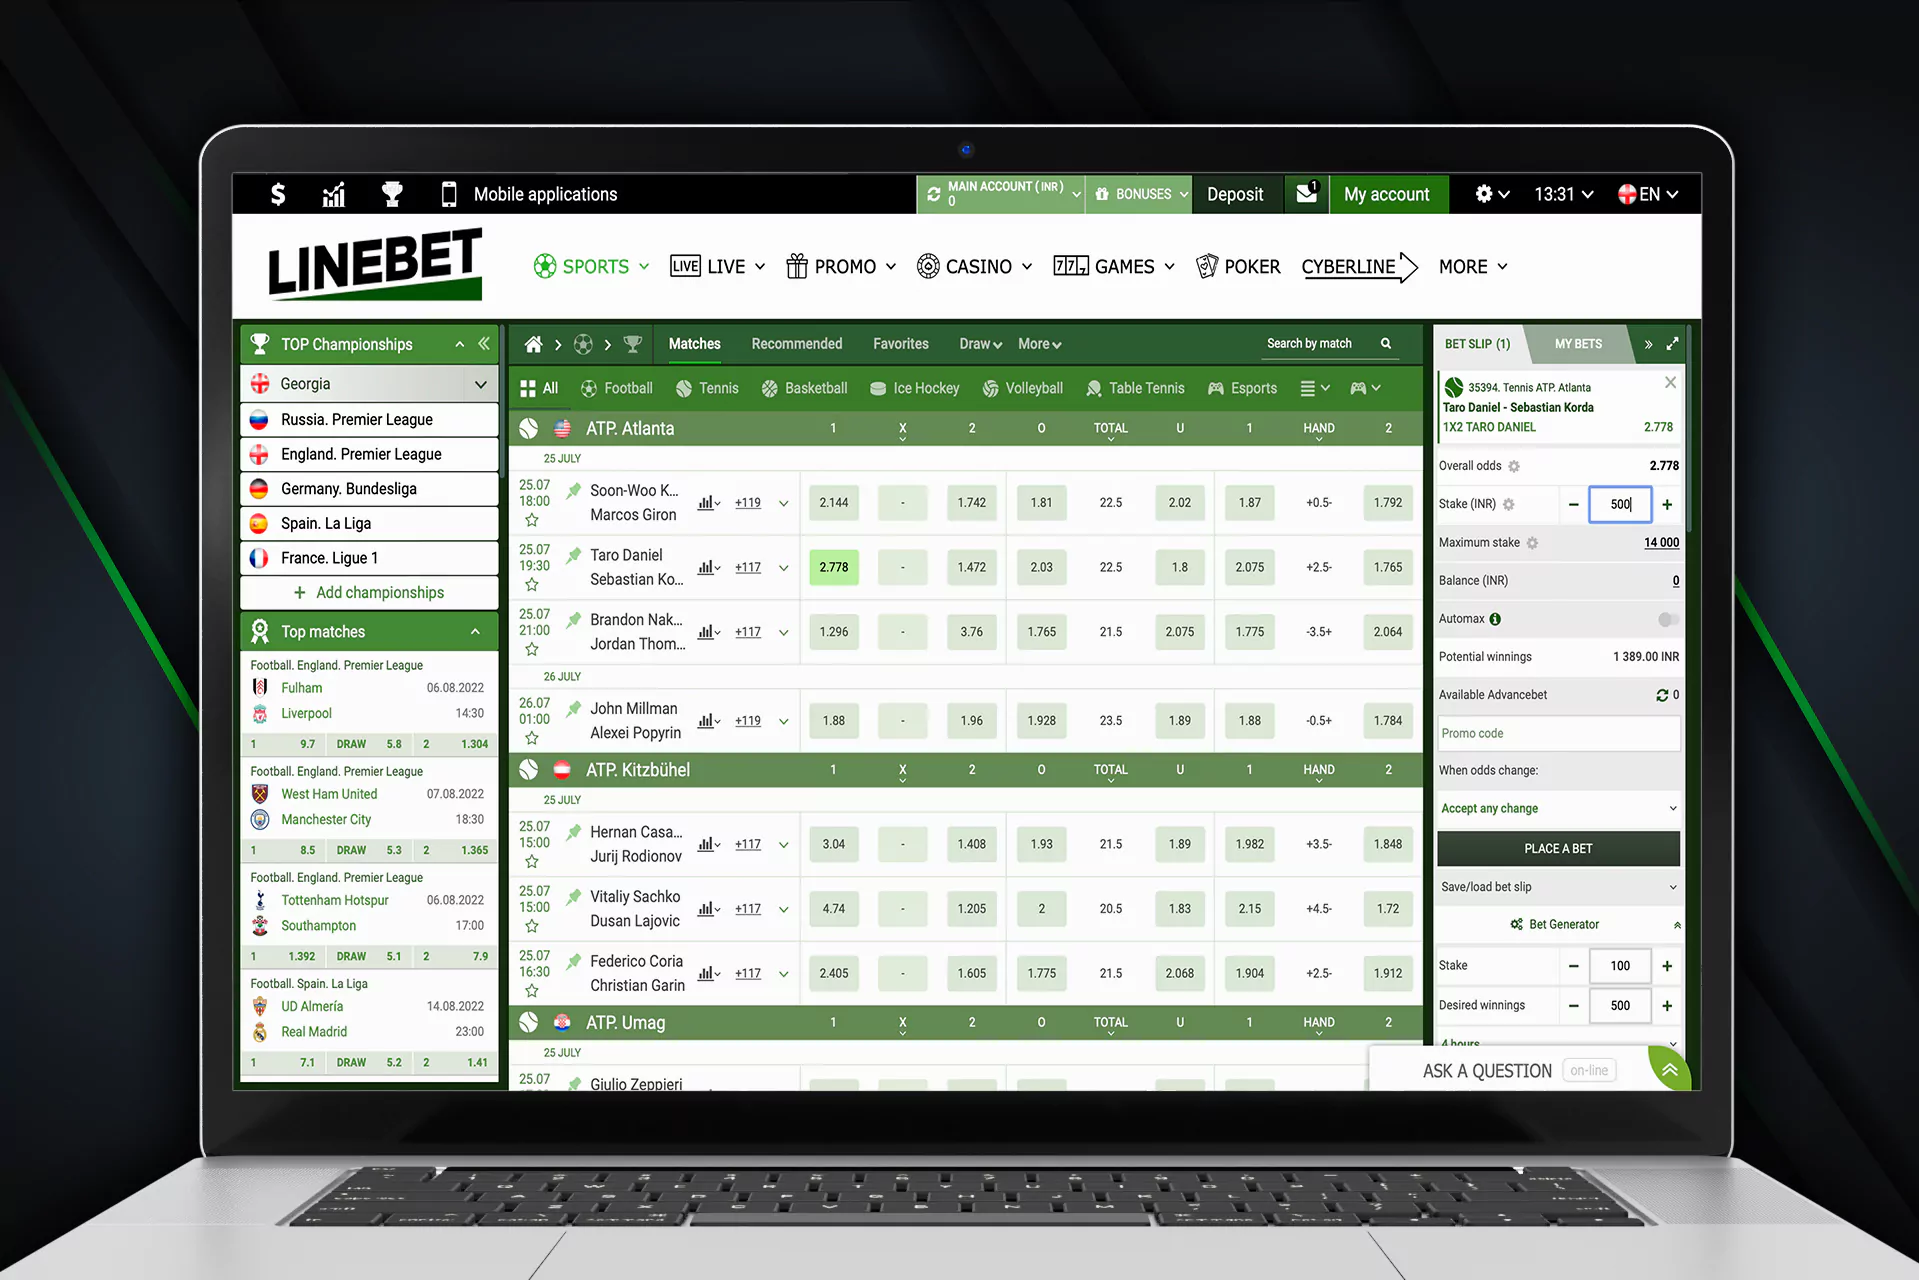 SIgn up for Linebet, pick the event and place a bet on your favorite team or player.